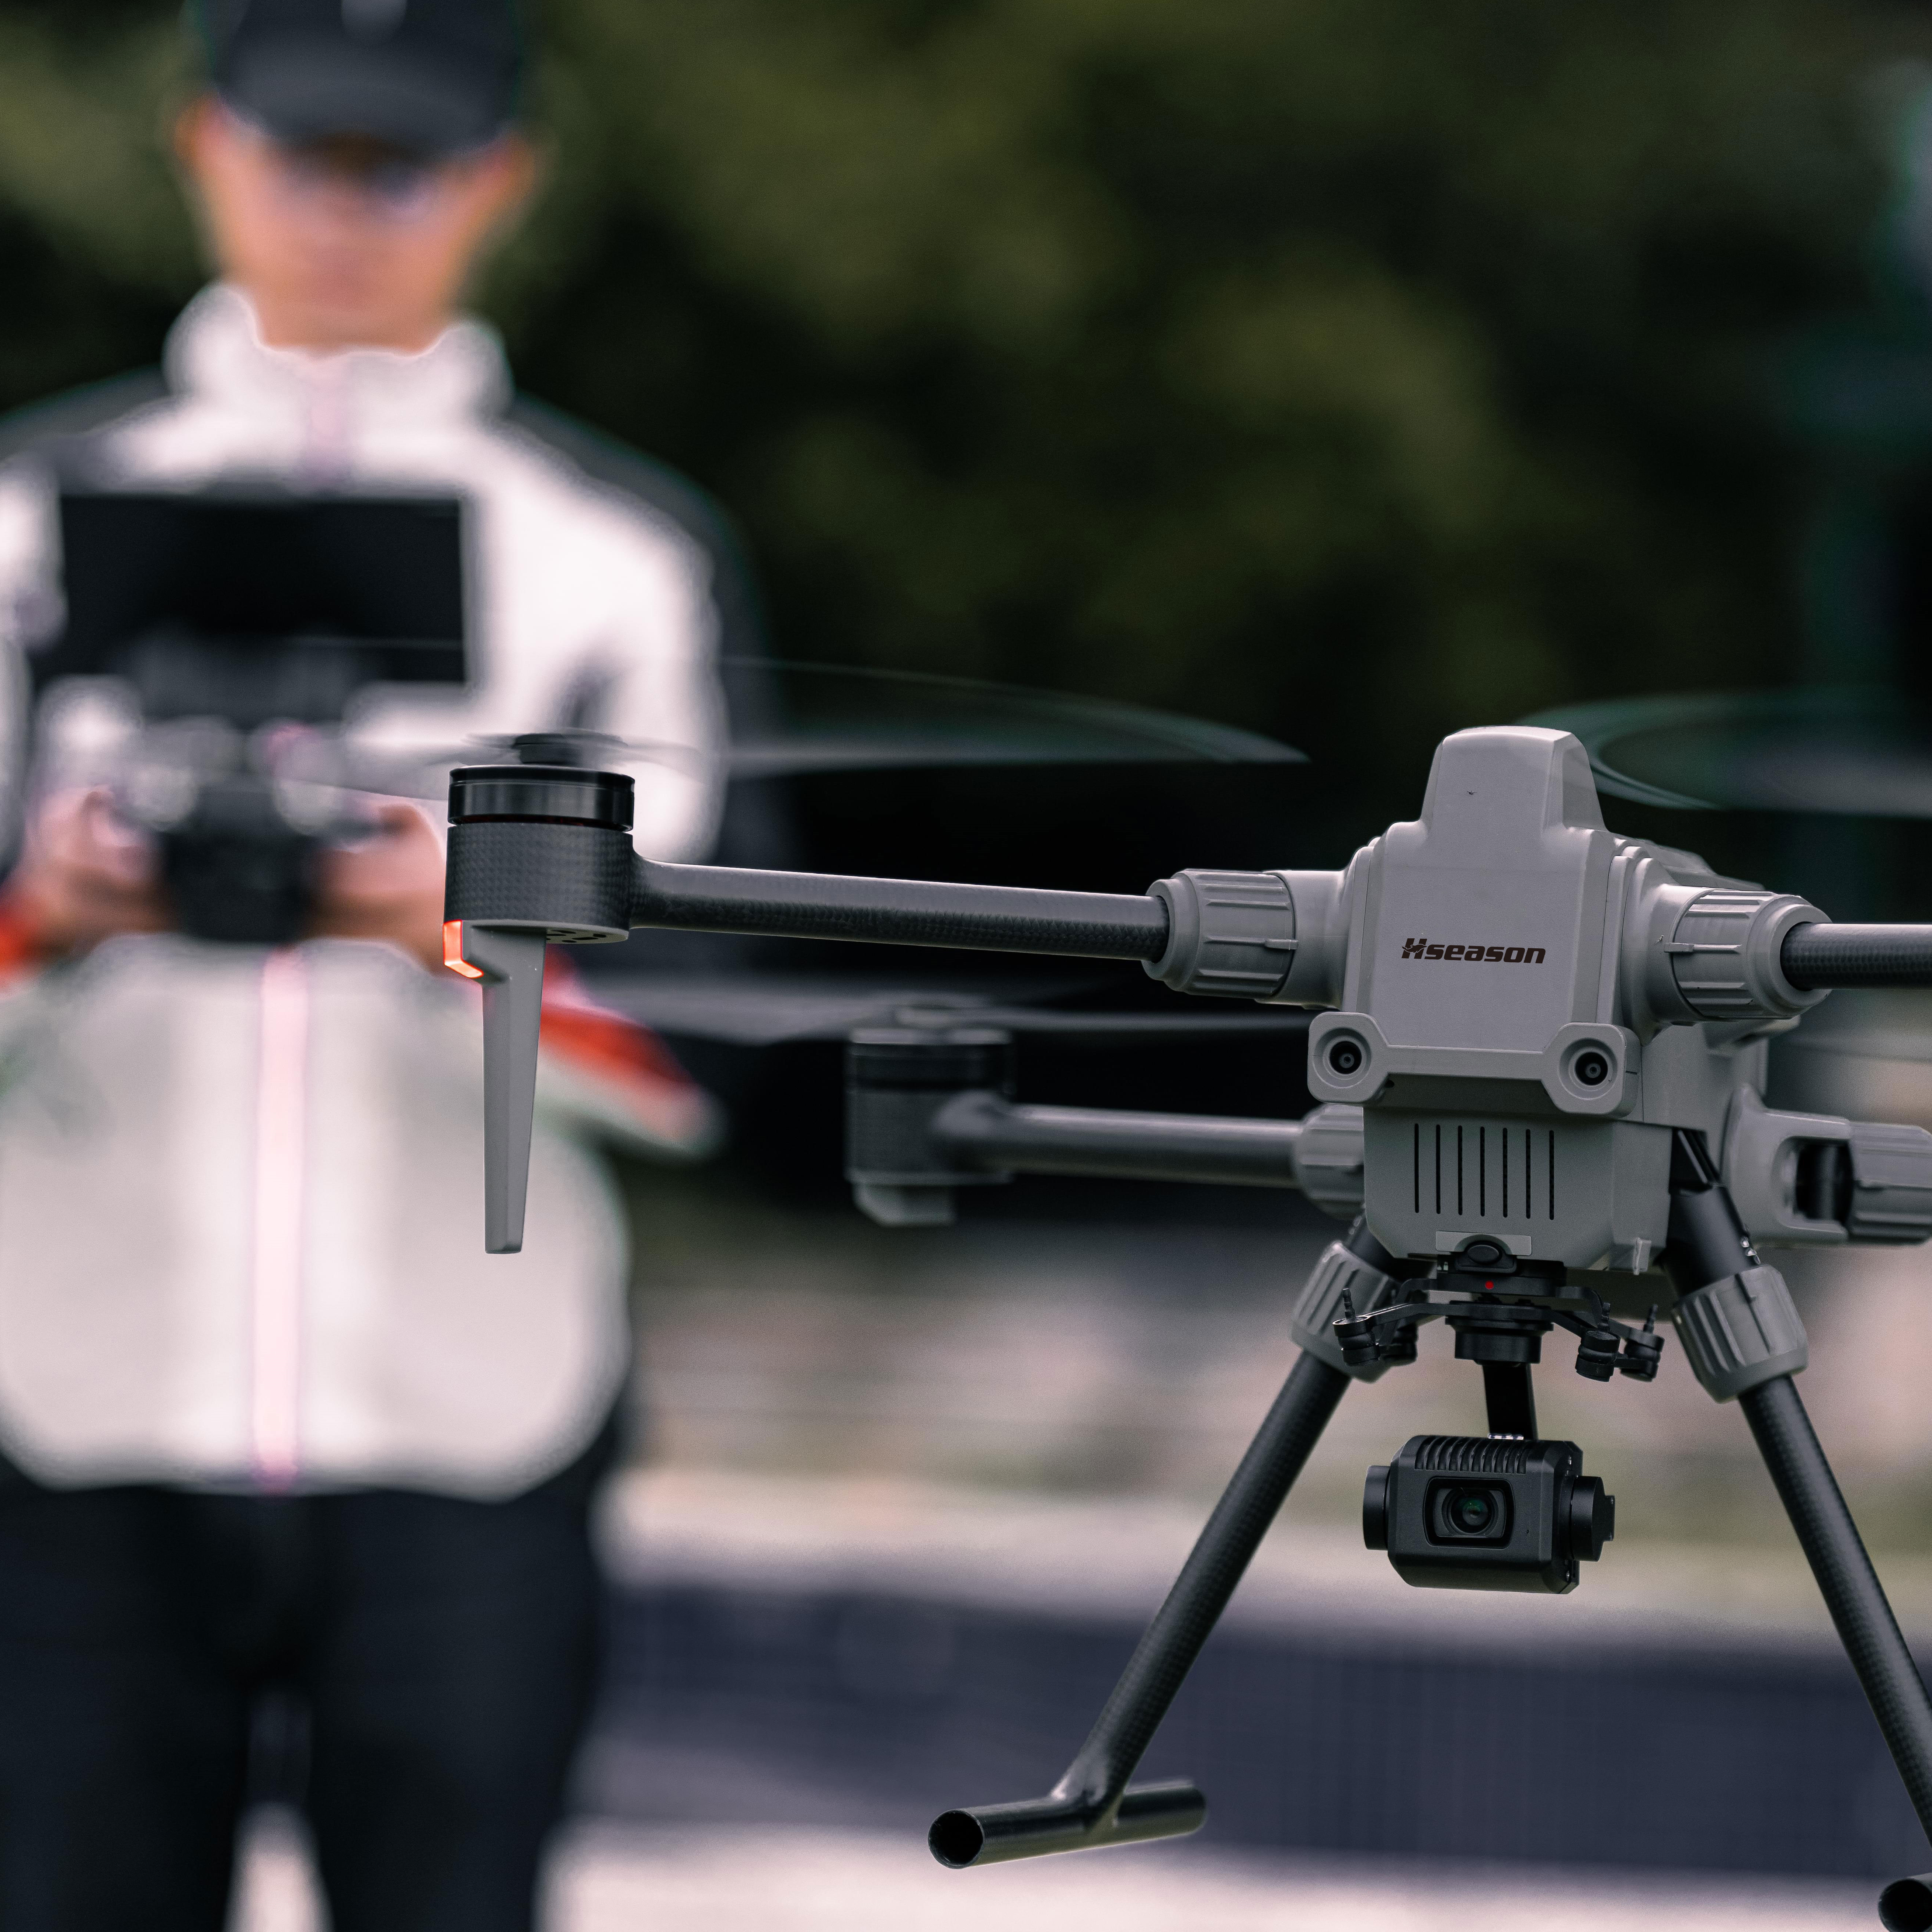 Flagship Workpiece S400 Breaks New Ground of Professional Drones